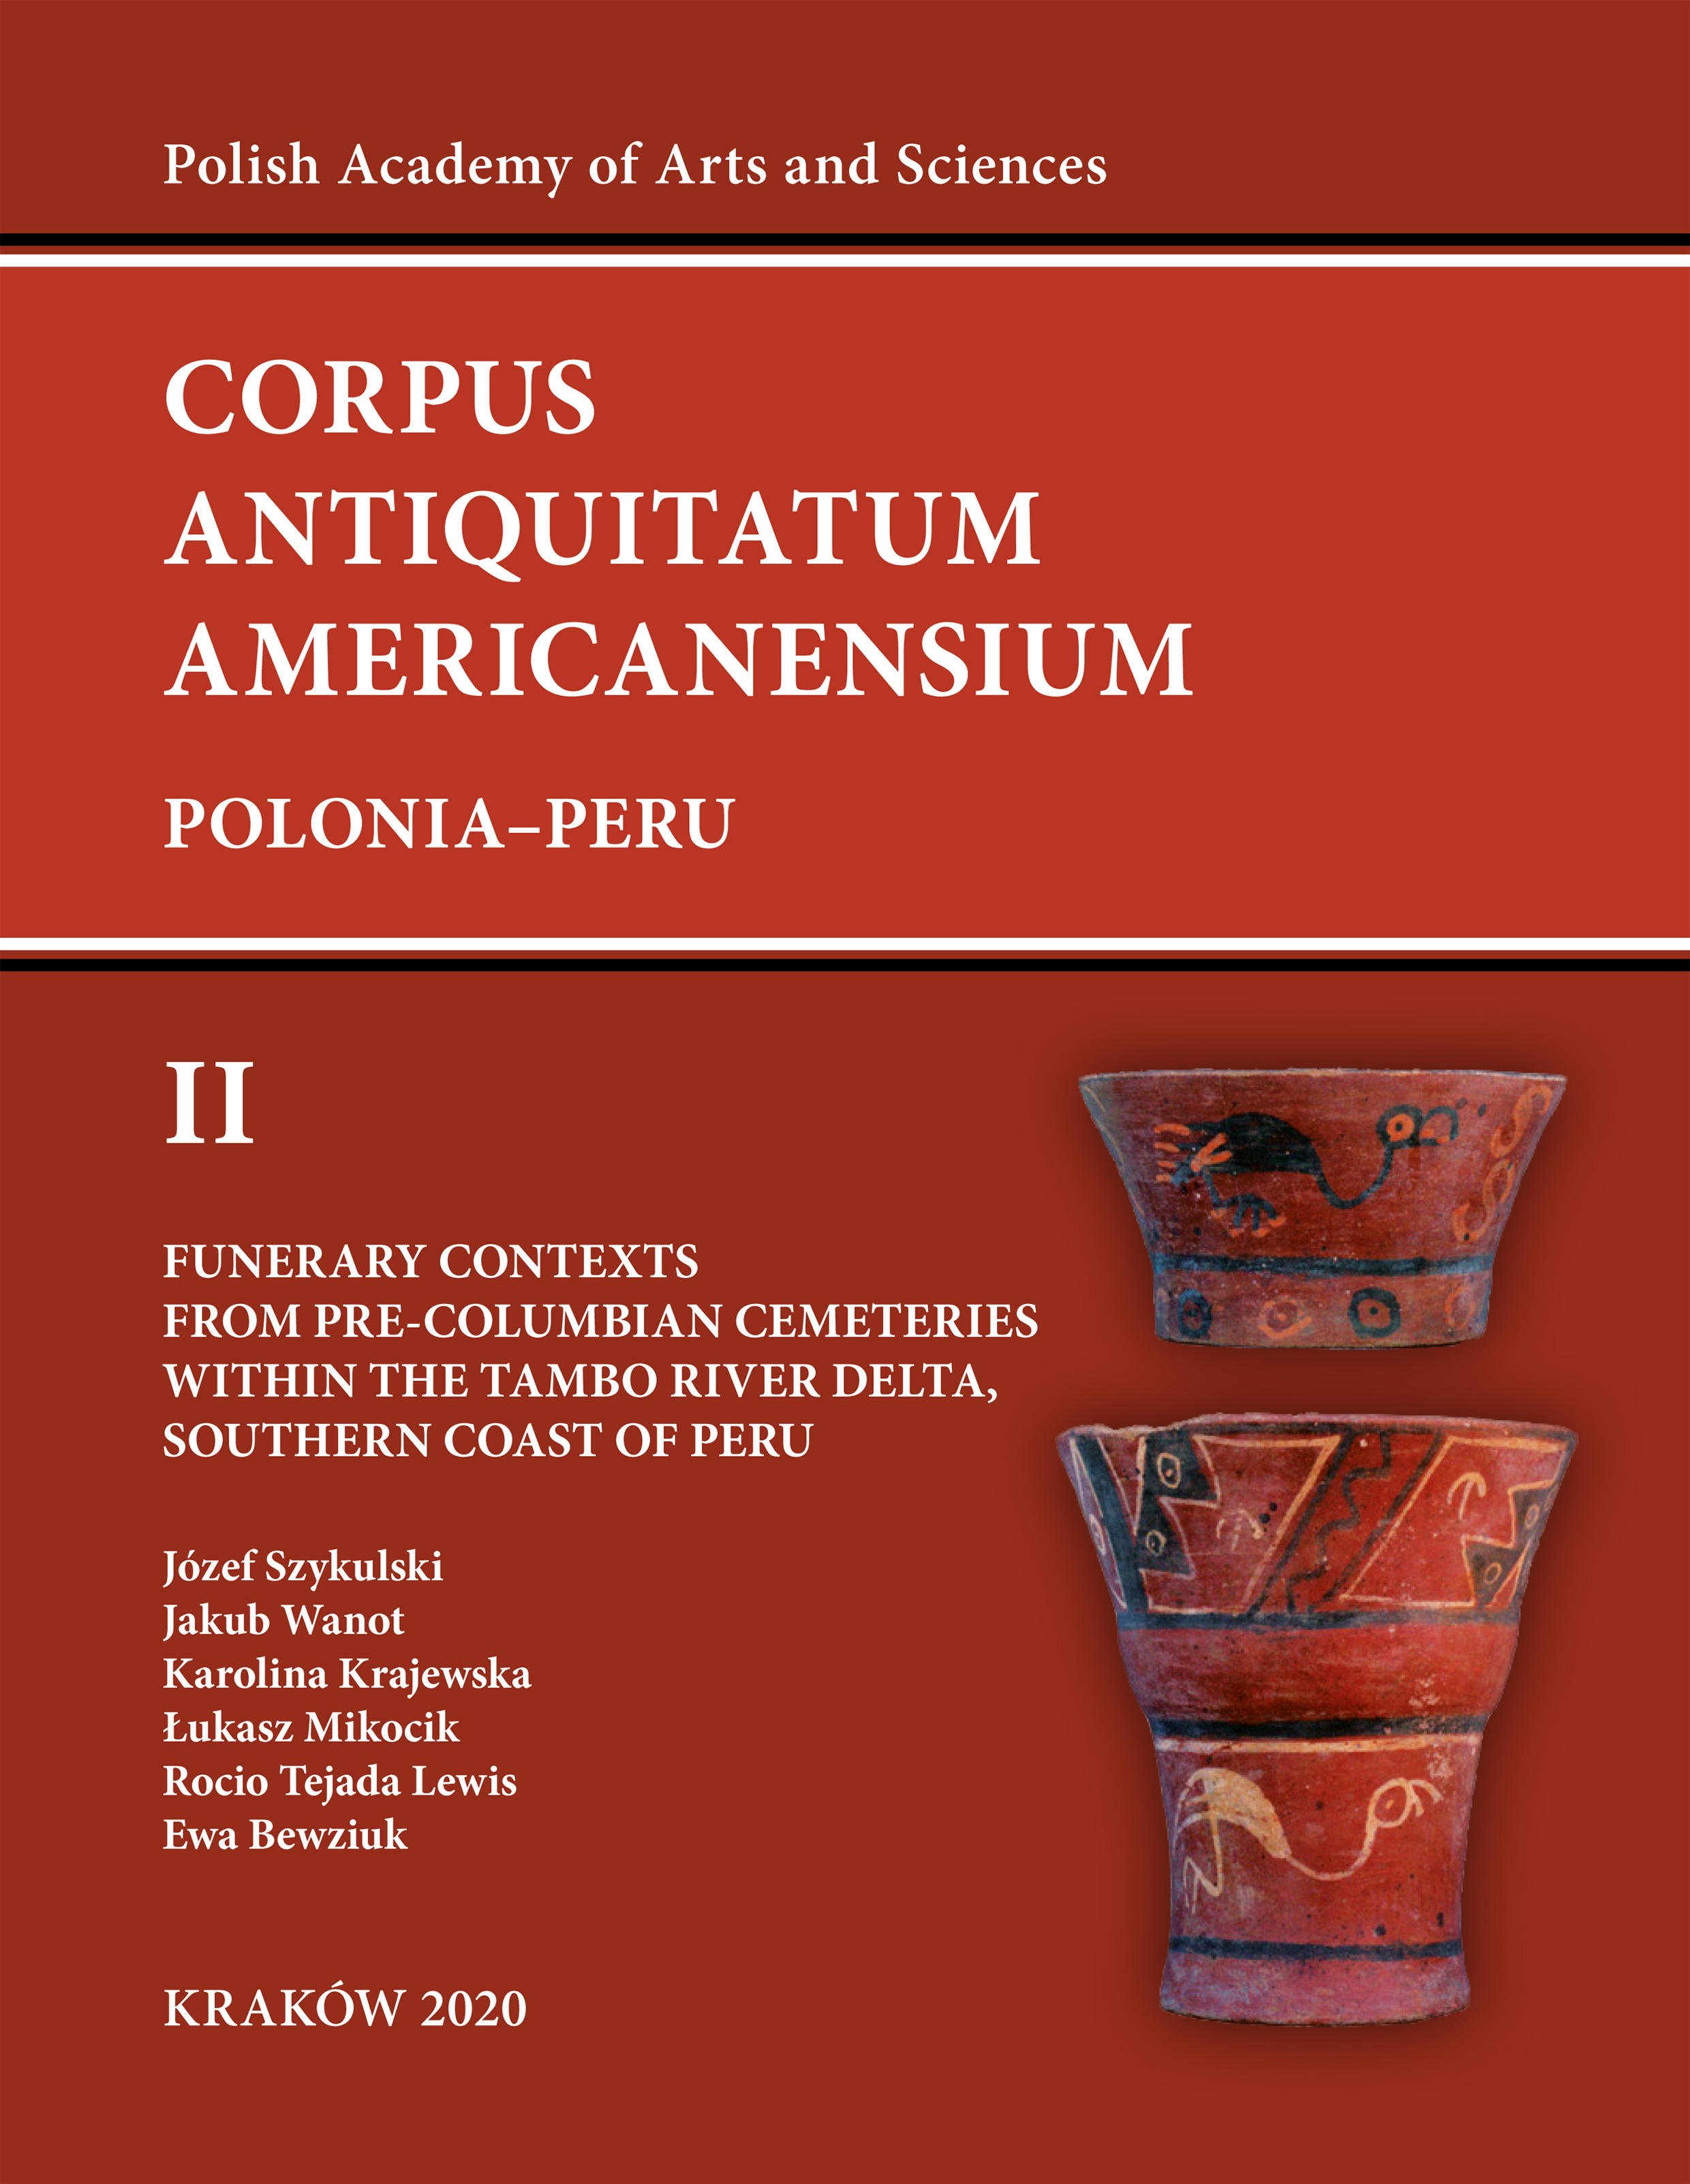 Funerary Contexts from Pre-Columbian